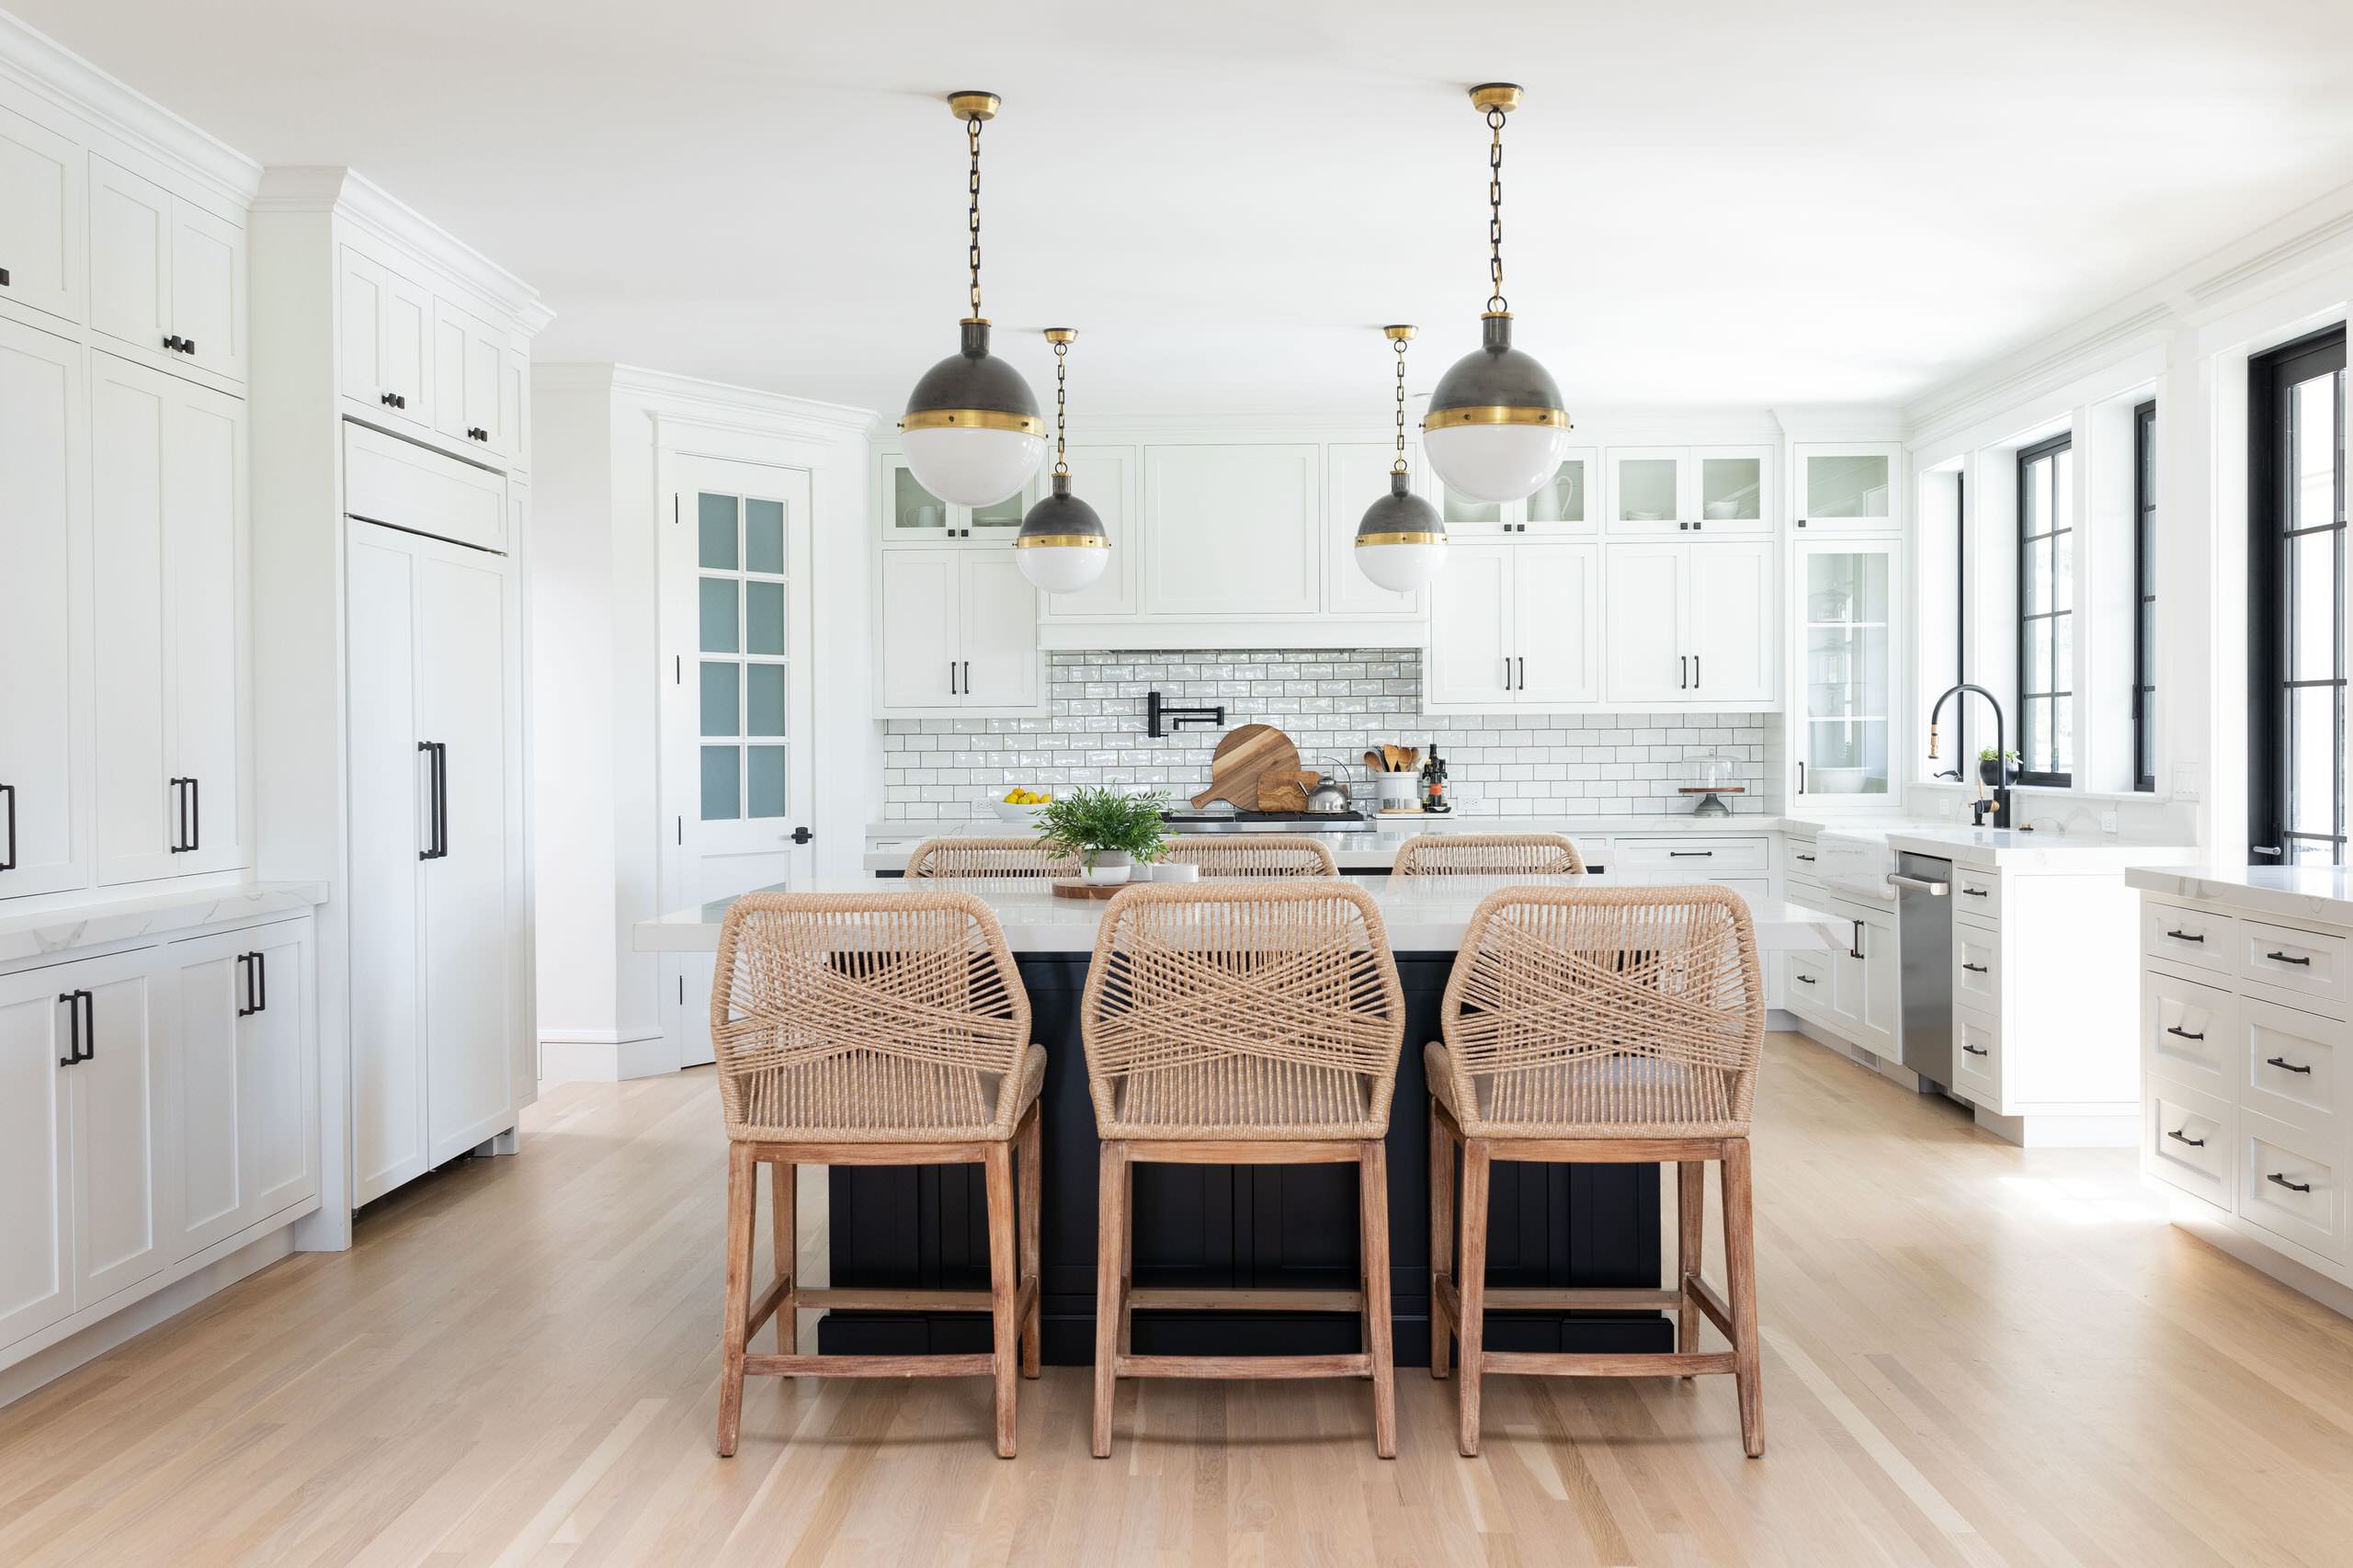 The Light & Airy Kitchen Design Trend   The Cabinet Doctors